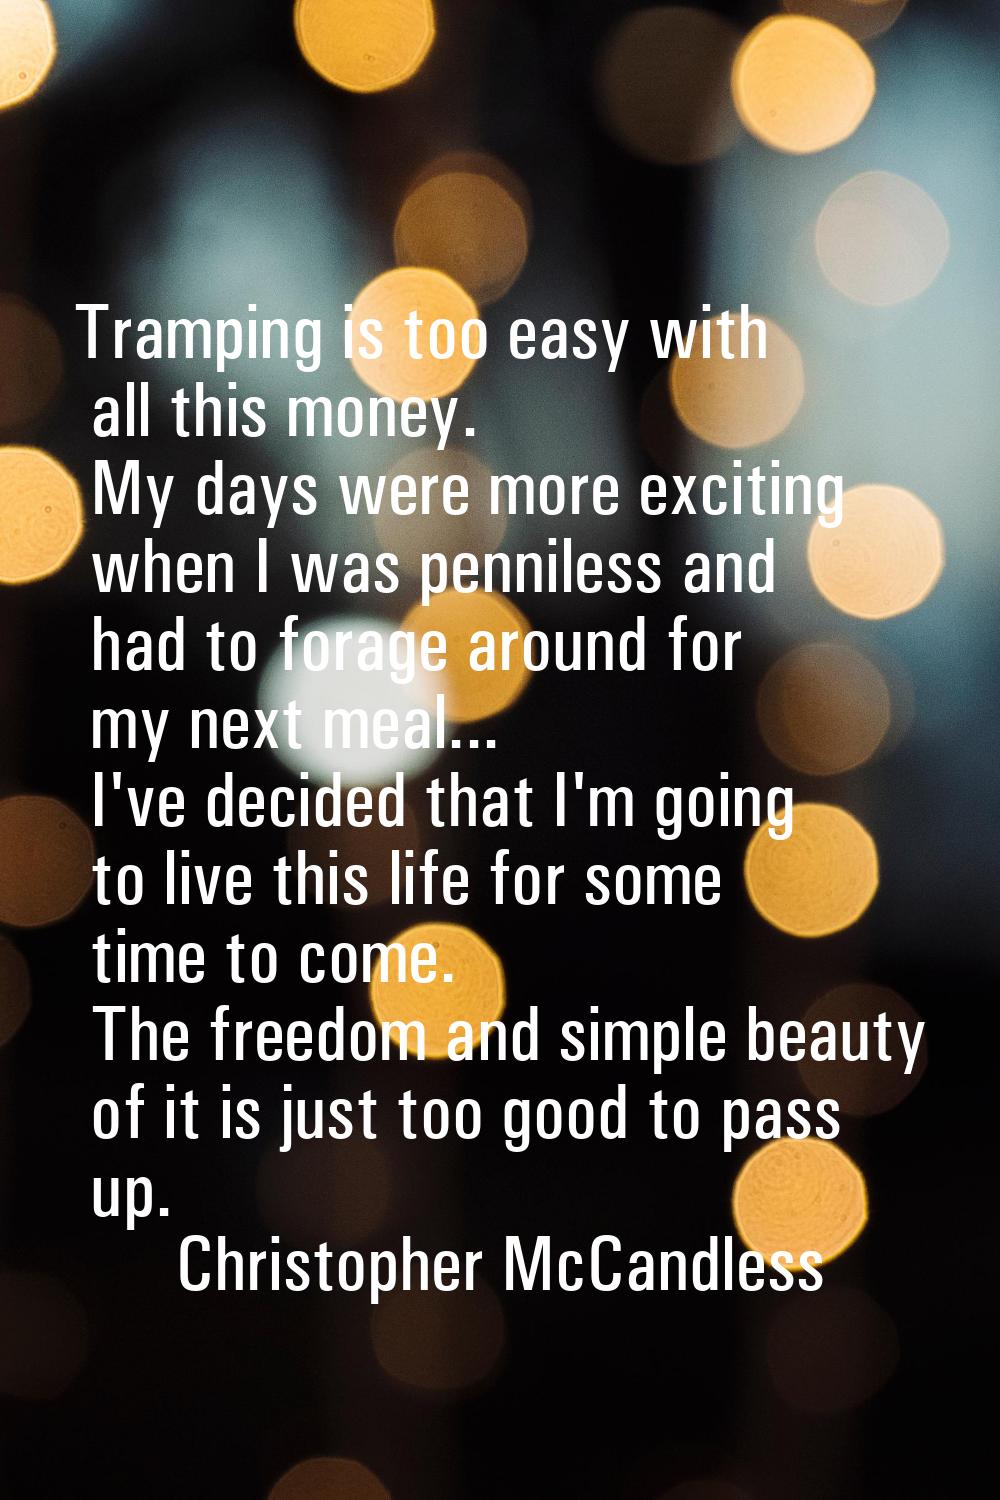 Tramping is too easy with all this money. My days were more exciting when I was penniless and had t